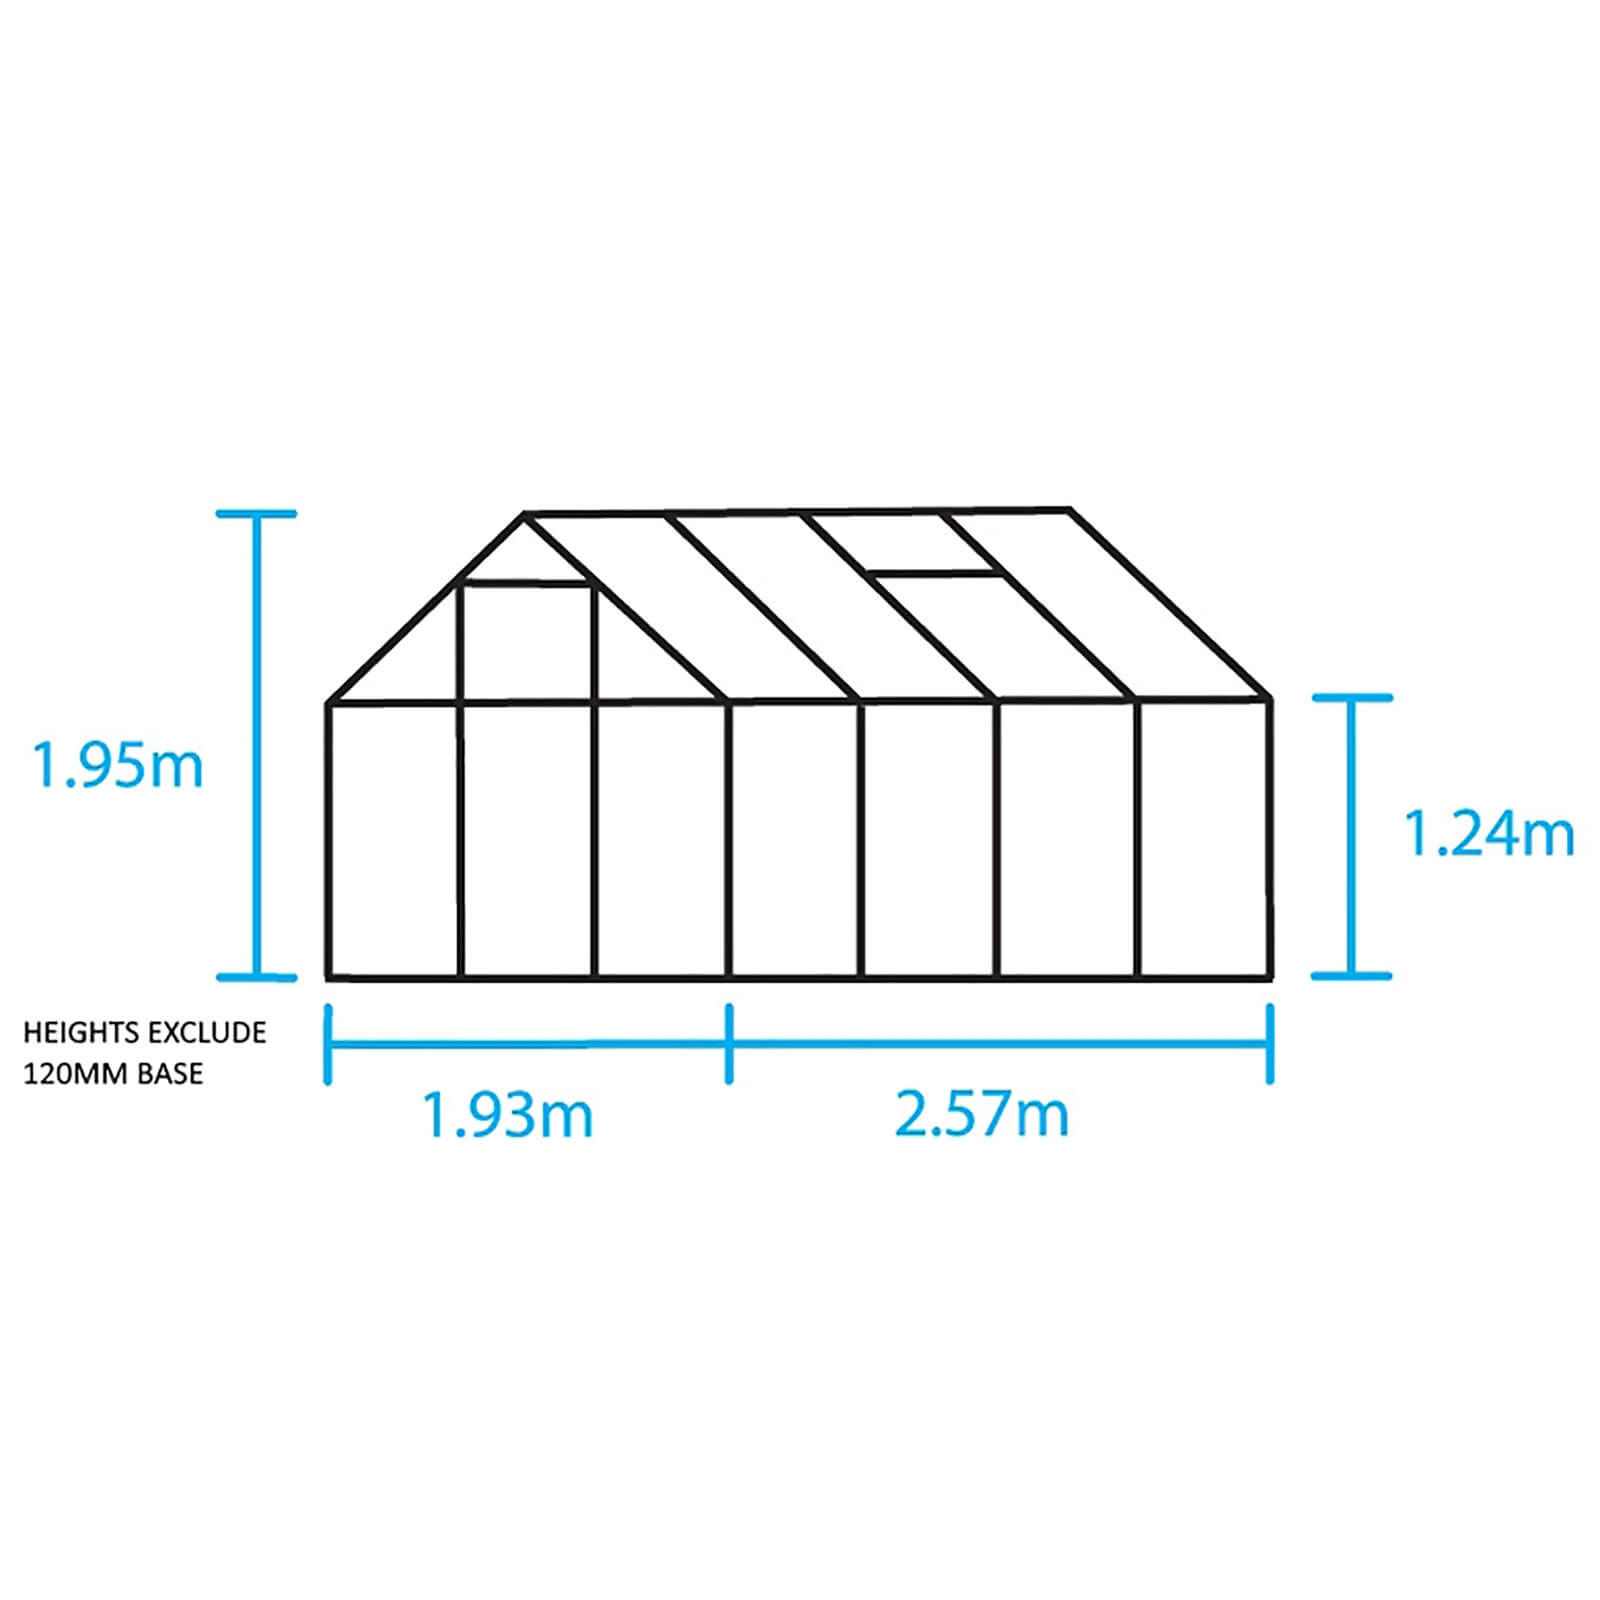 Halls 8 x 6ft Aluminium Popular Green Greenhouse with Toughened Glass & Base